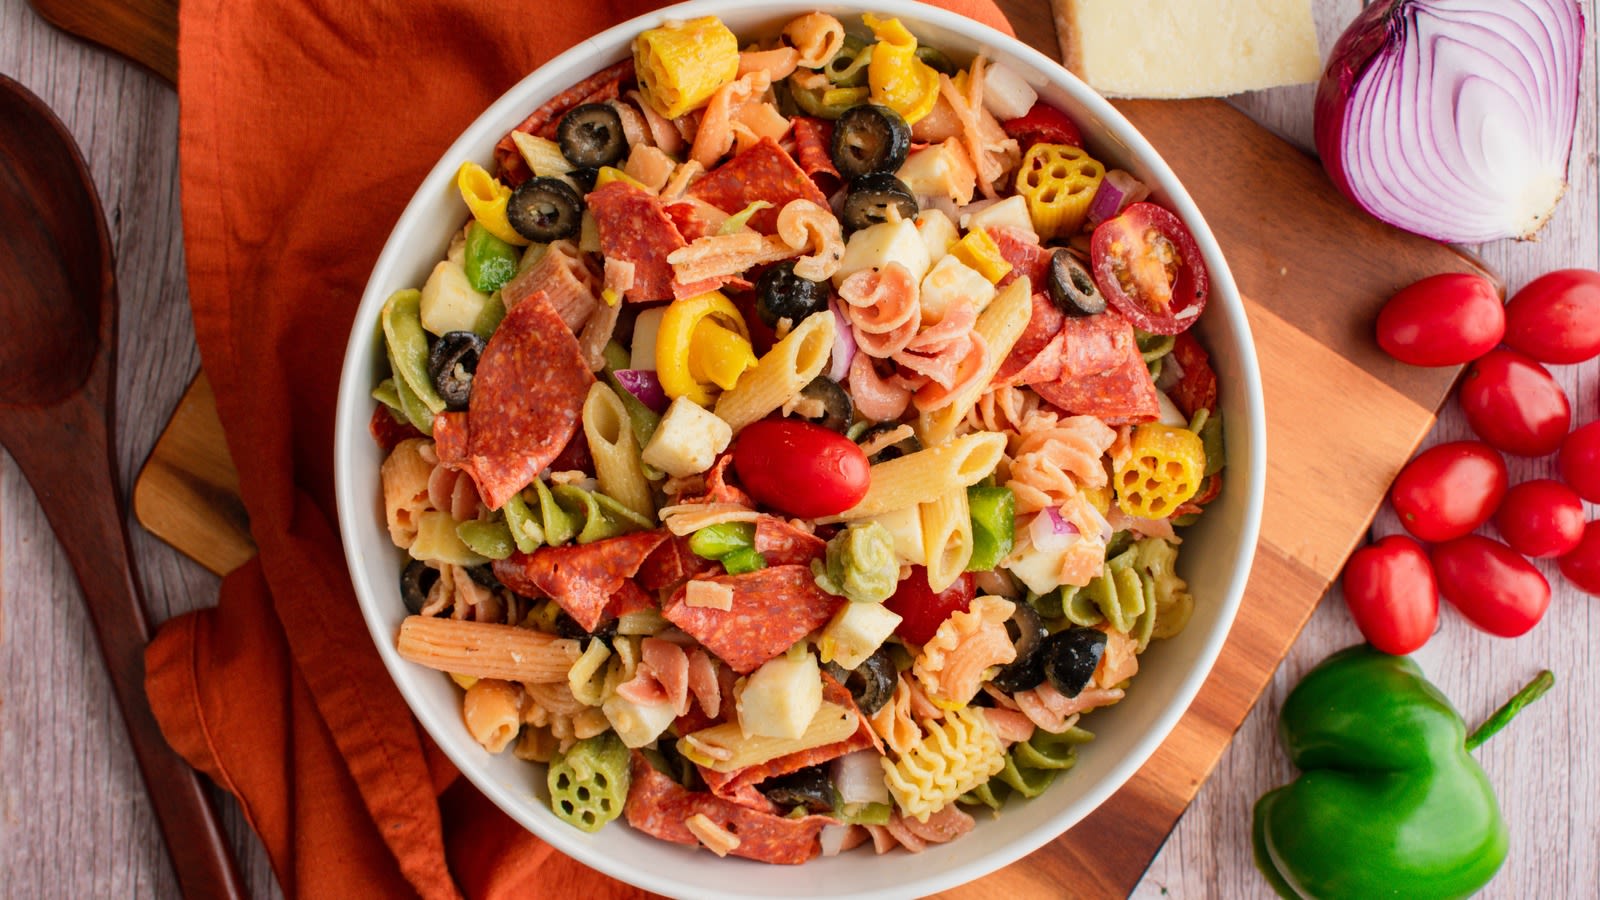 Pepperoni Helps Give Your Pasta Salad A Kick Of Meaty Goodness